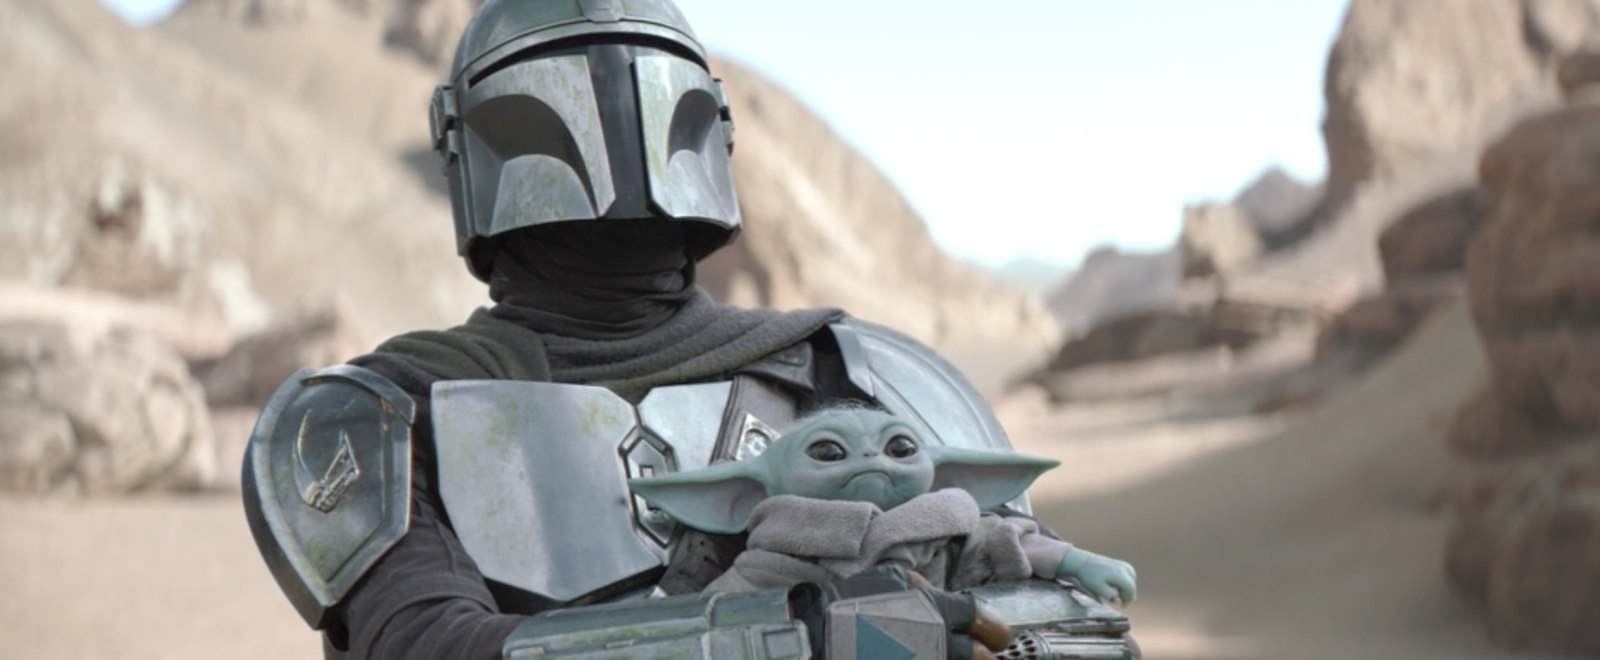 New Star Wars Movie Featuring The Mandalorian and Baby Yoda coming Soon